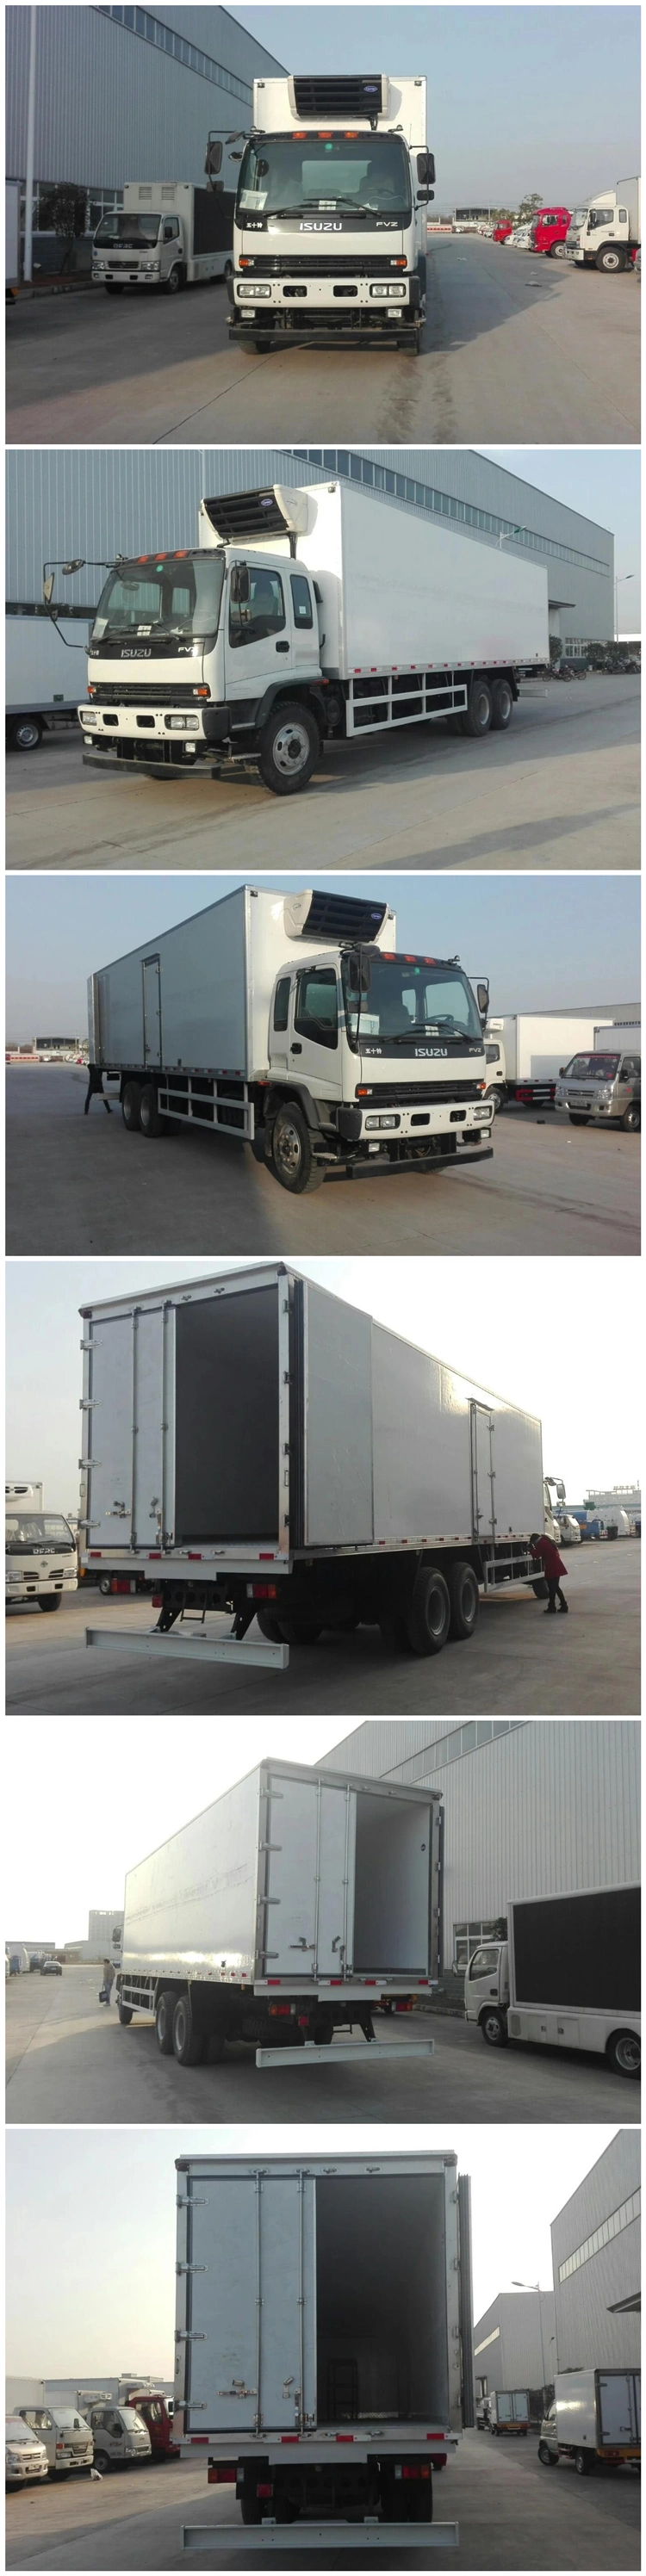 Japanese Brand 10t 15t 20t Carrier Thermo King Refrigerator Freezer Truck 15 Tons 20tons Refrigerated Freezer Cooling Van Refrigerator Trucks for Sale